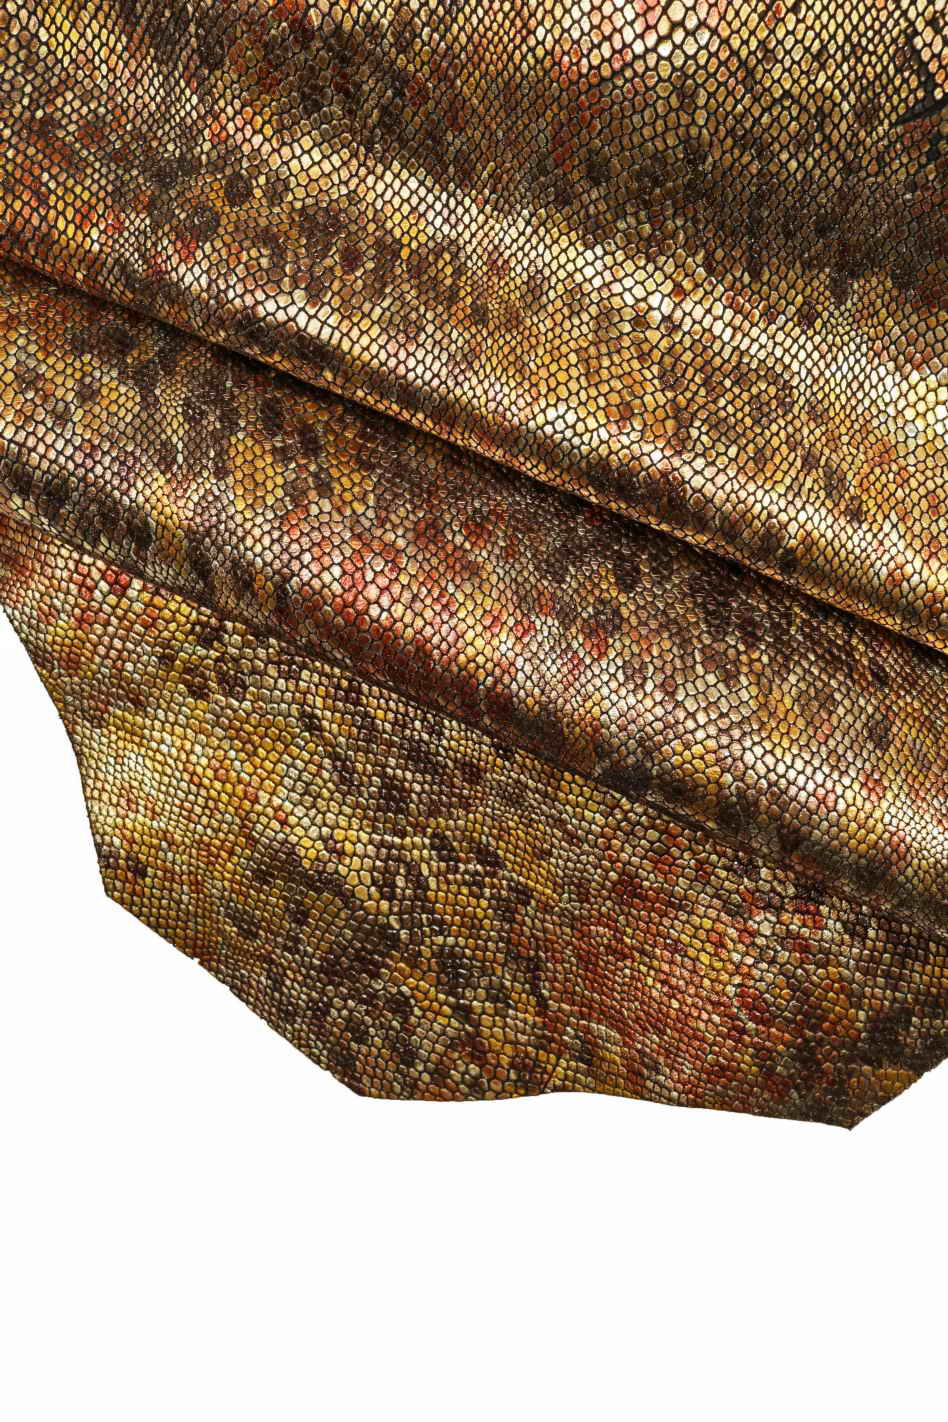 https://www.lagarzarara.com/26814-thickbox_default/multicolored-printed-python-goatskin-leather-engraved-reptile-scale-print-design-abstract-textured-snake-hide-.jpg